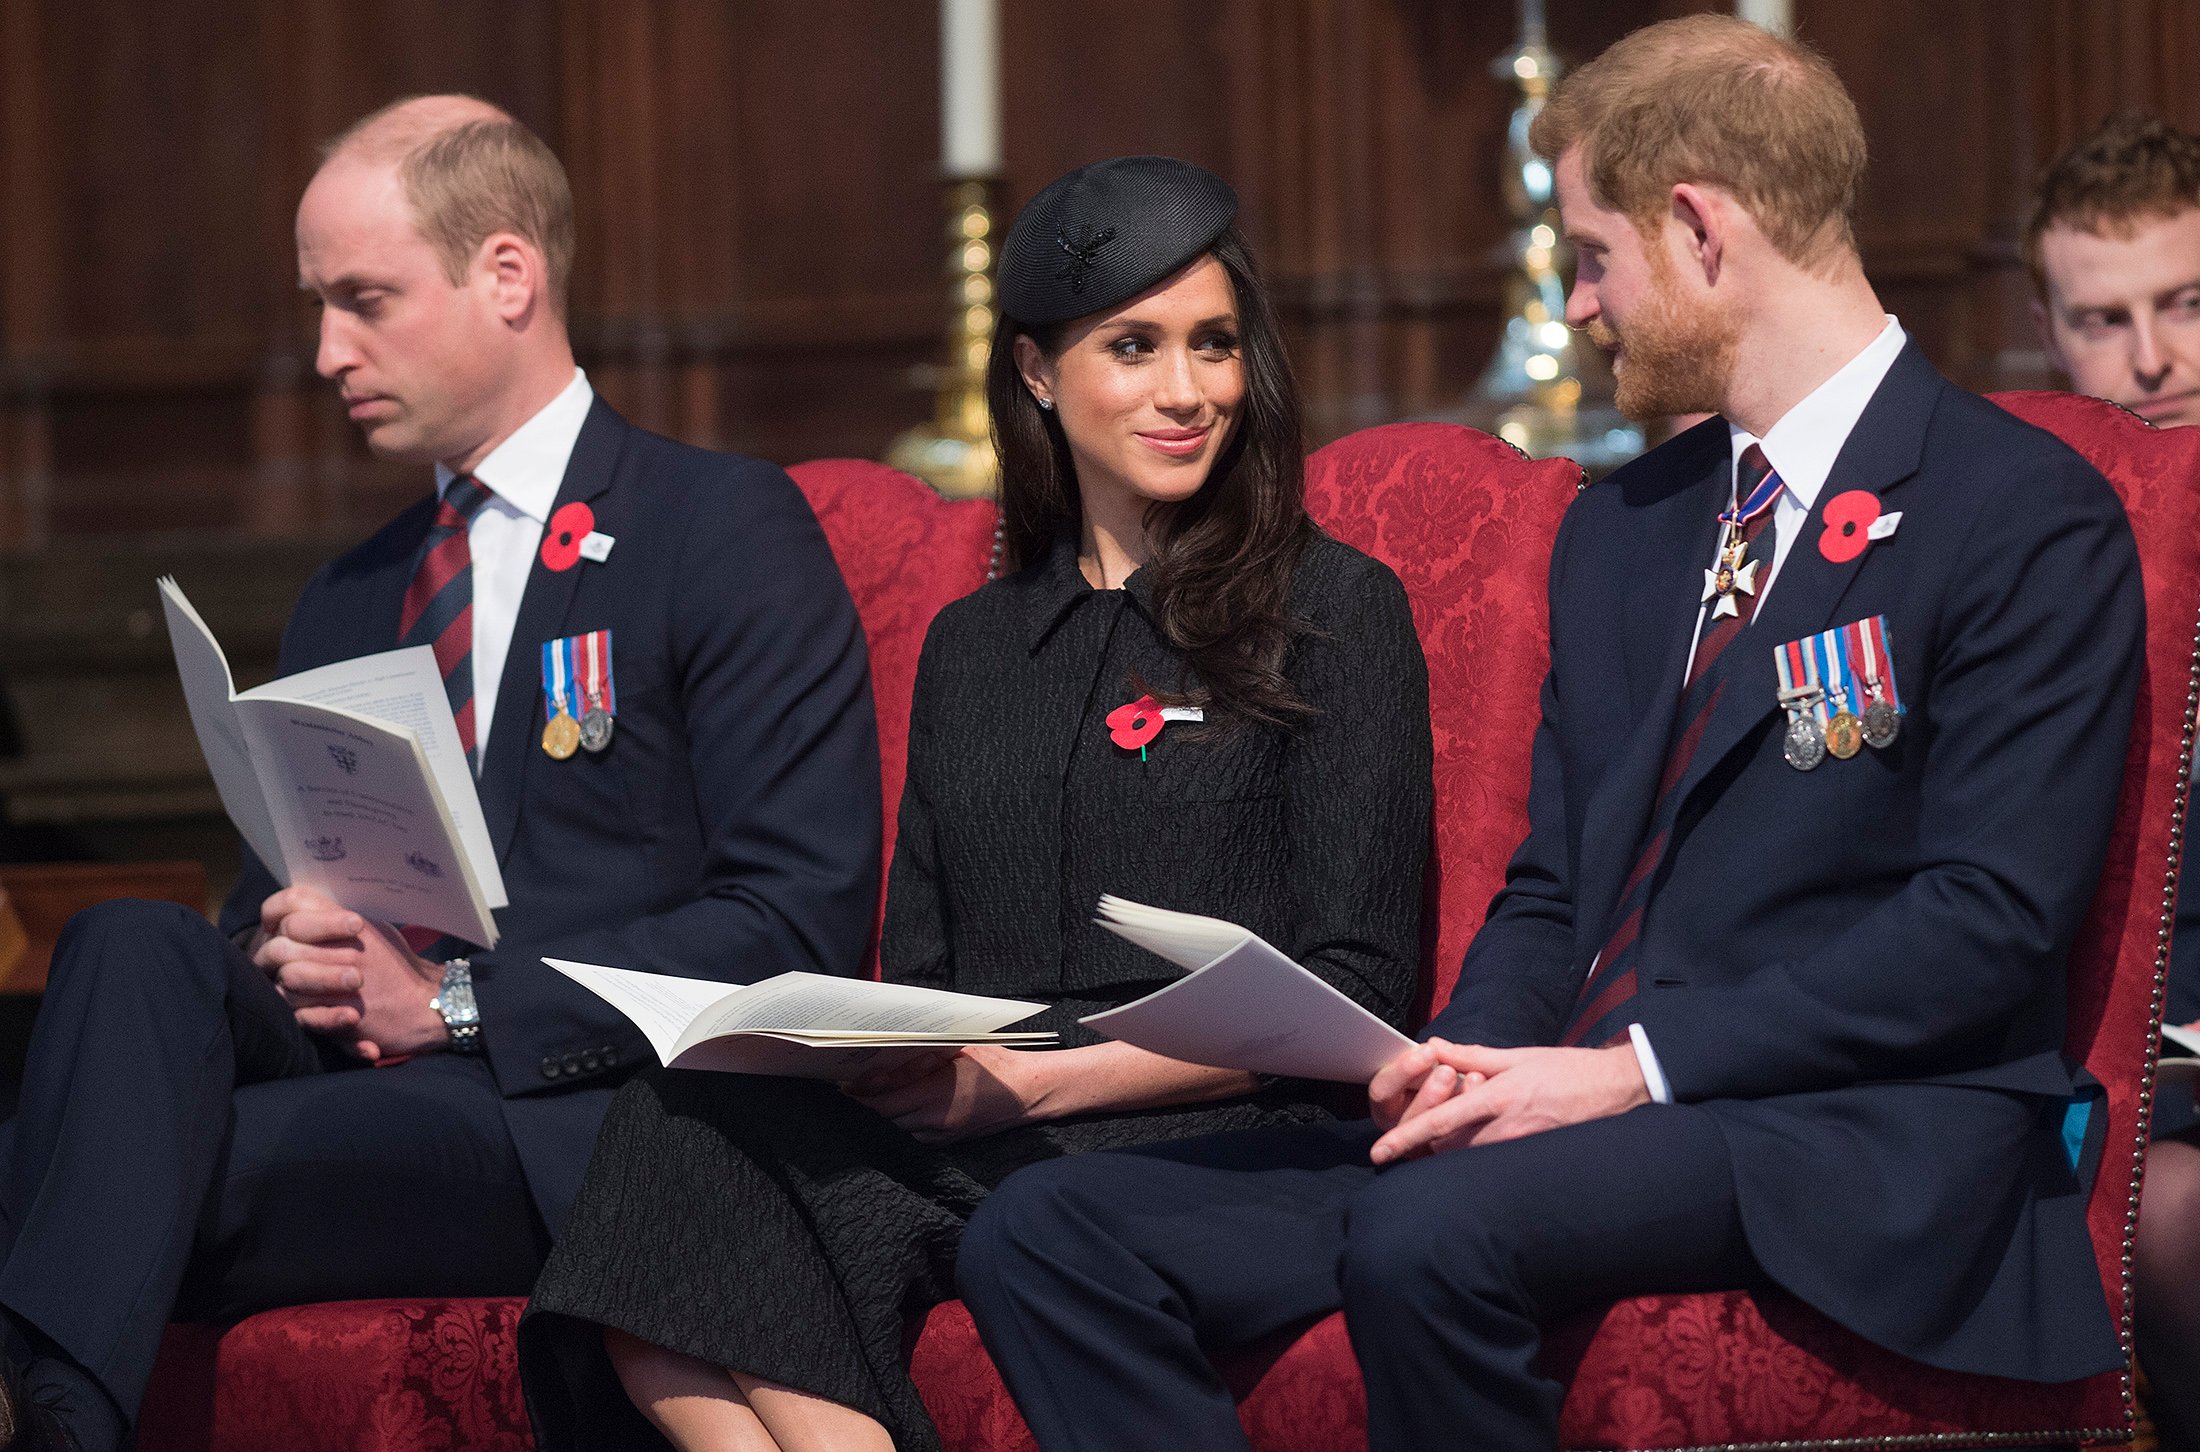 Prince William, Meghan Markle, and Prince Harry seated next to each other during an Anzac Day service at Westminster Abbey